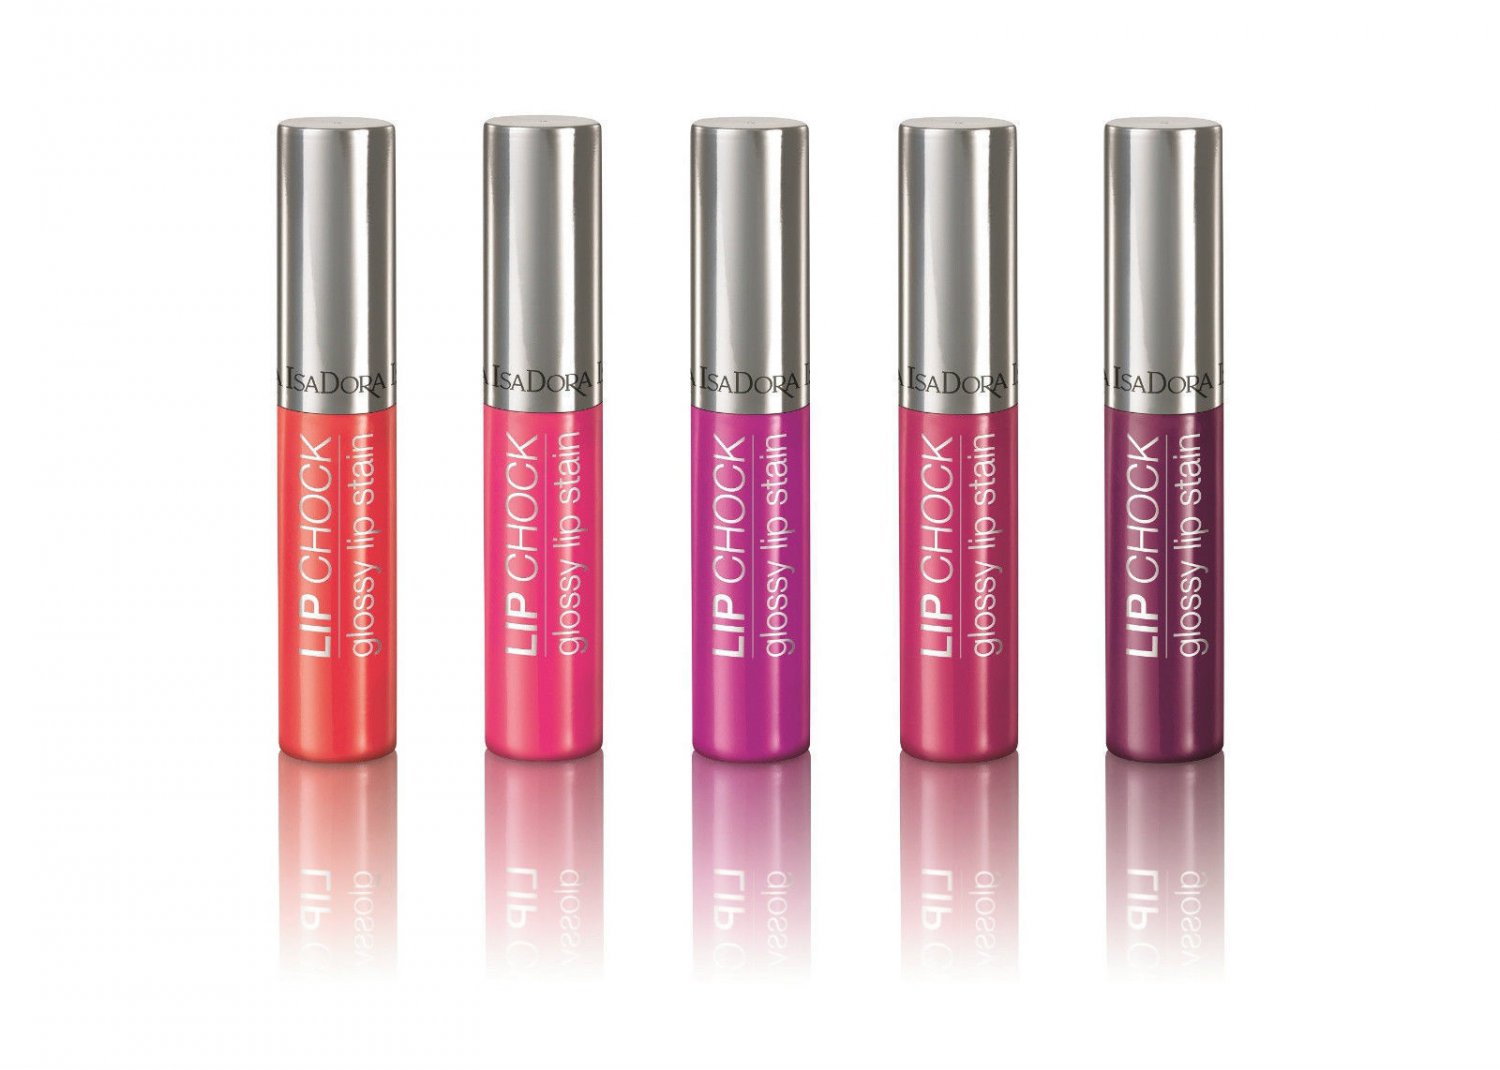 Isadora Lip Chock Glossy Lip Stain - An Innovative 3-in-1 Lip Product 4 ml.